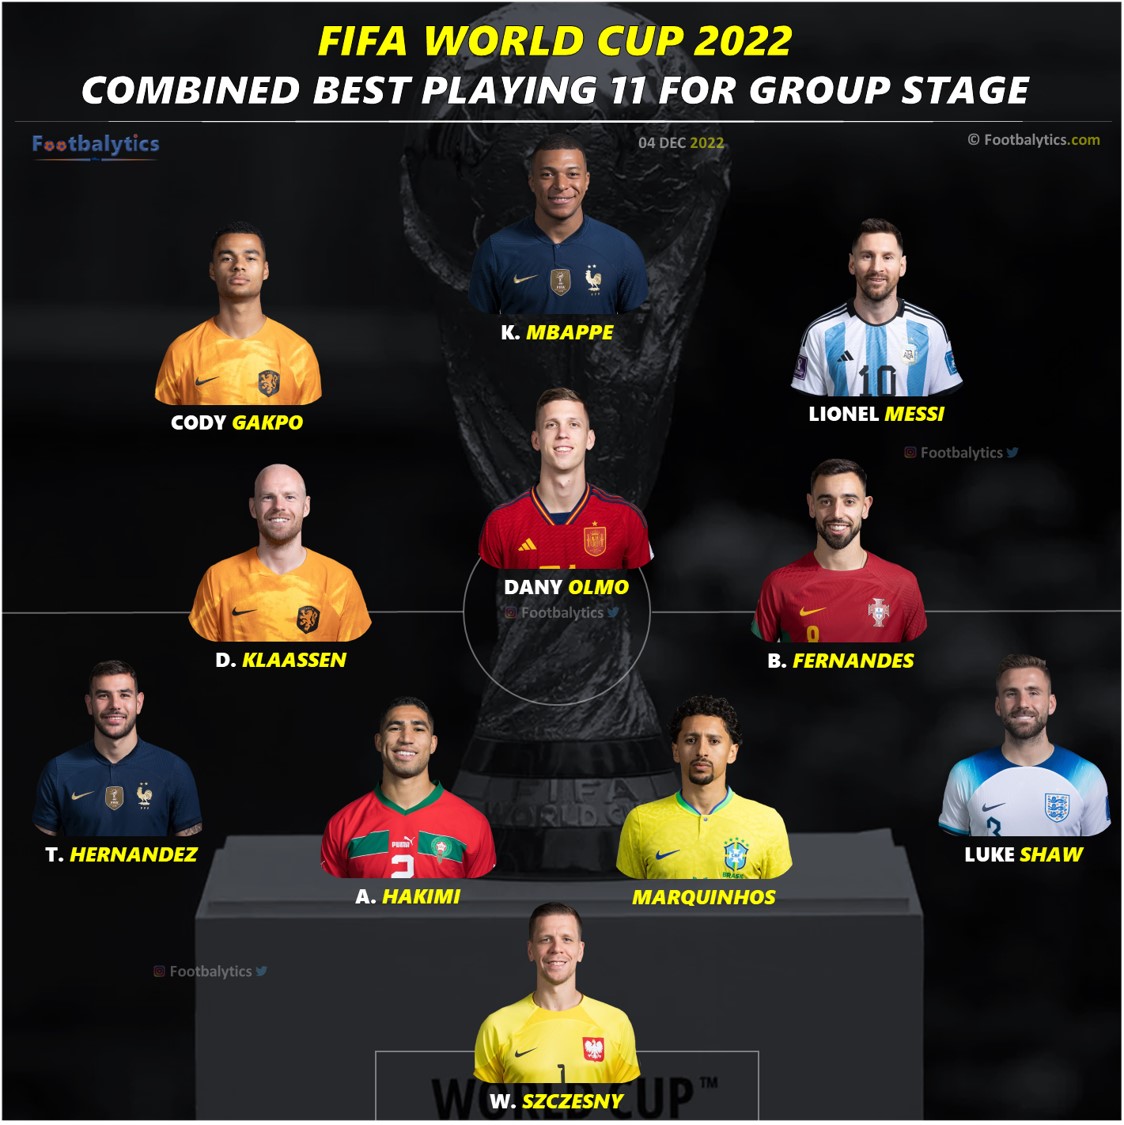 fifa world cup 2022 combined best playing 11 for the group stage